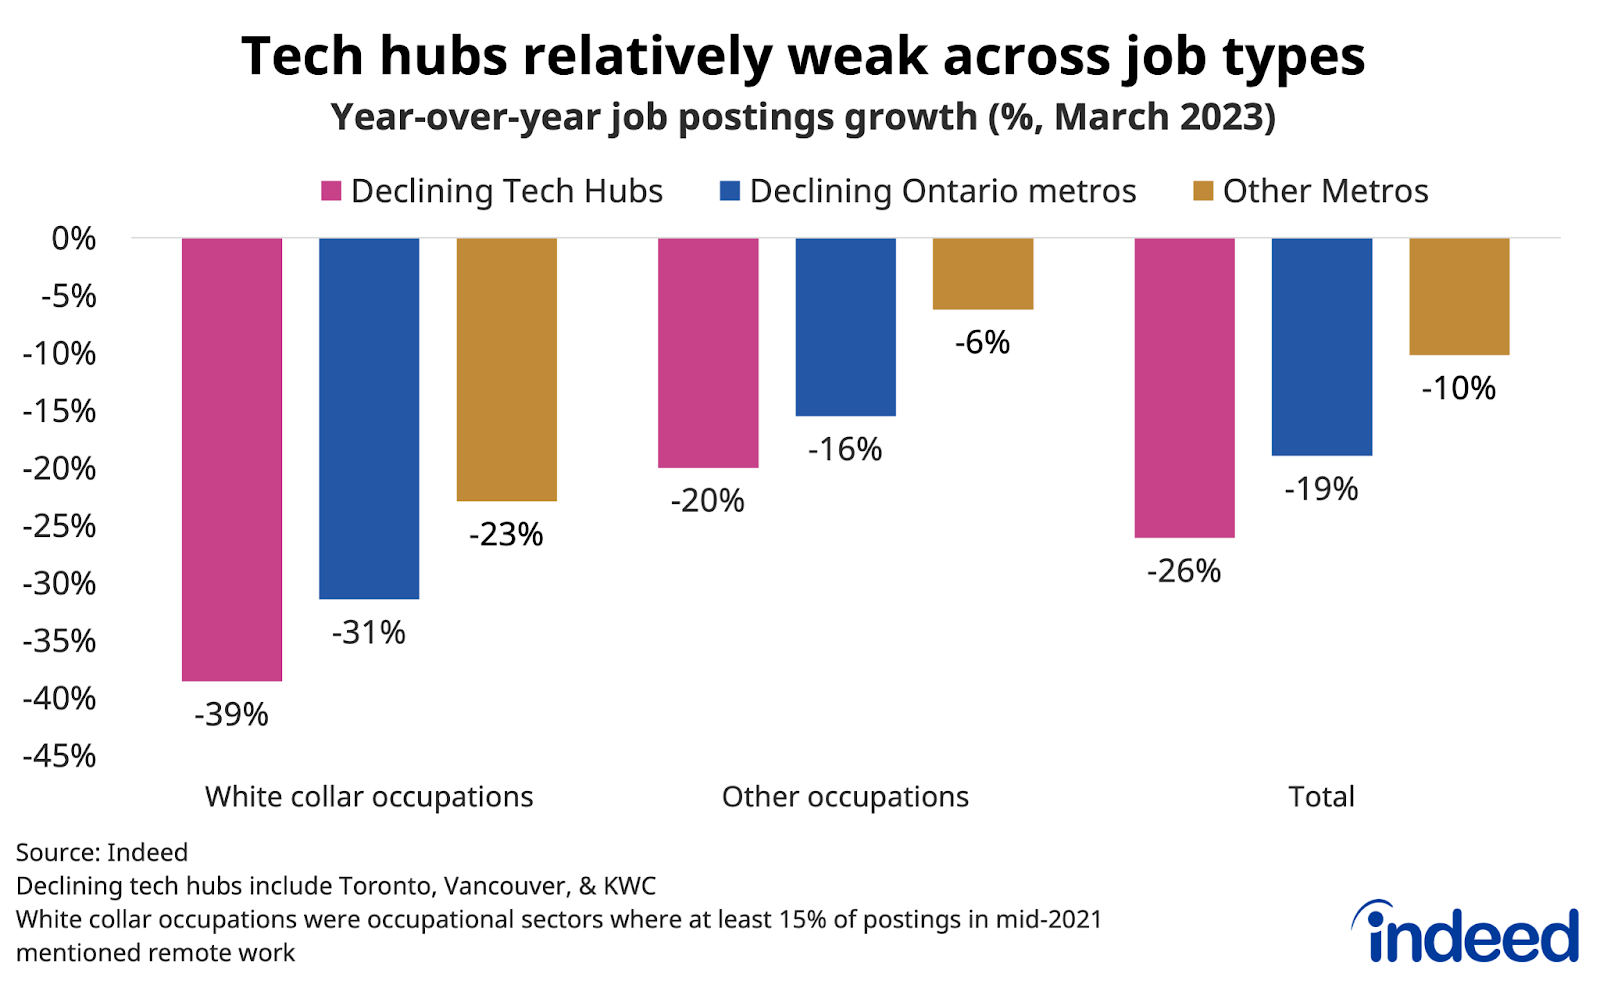 Bar graph titled “Tech hubs relatively weak across job types,” shows the year-over-year growth in job postings as of March 2023 across declining tech hubs.